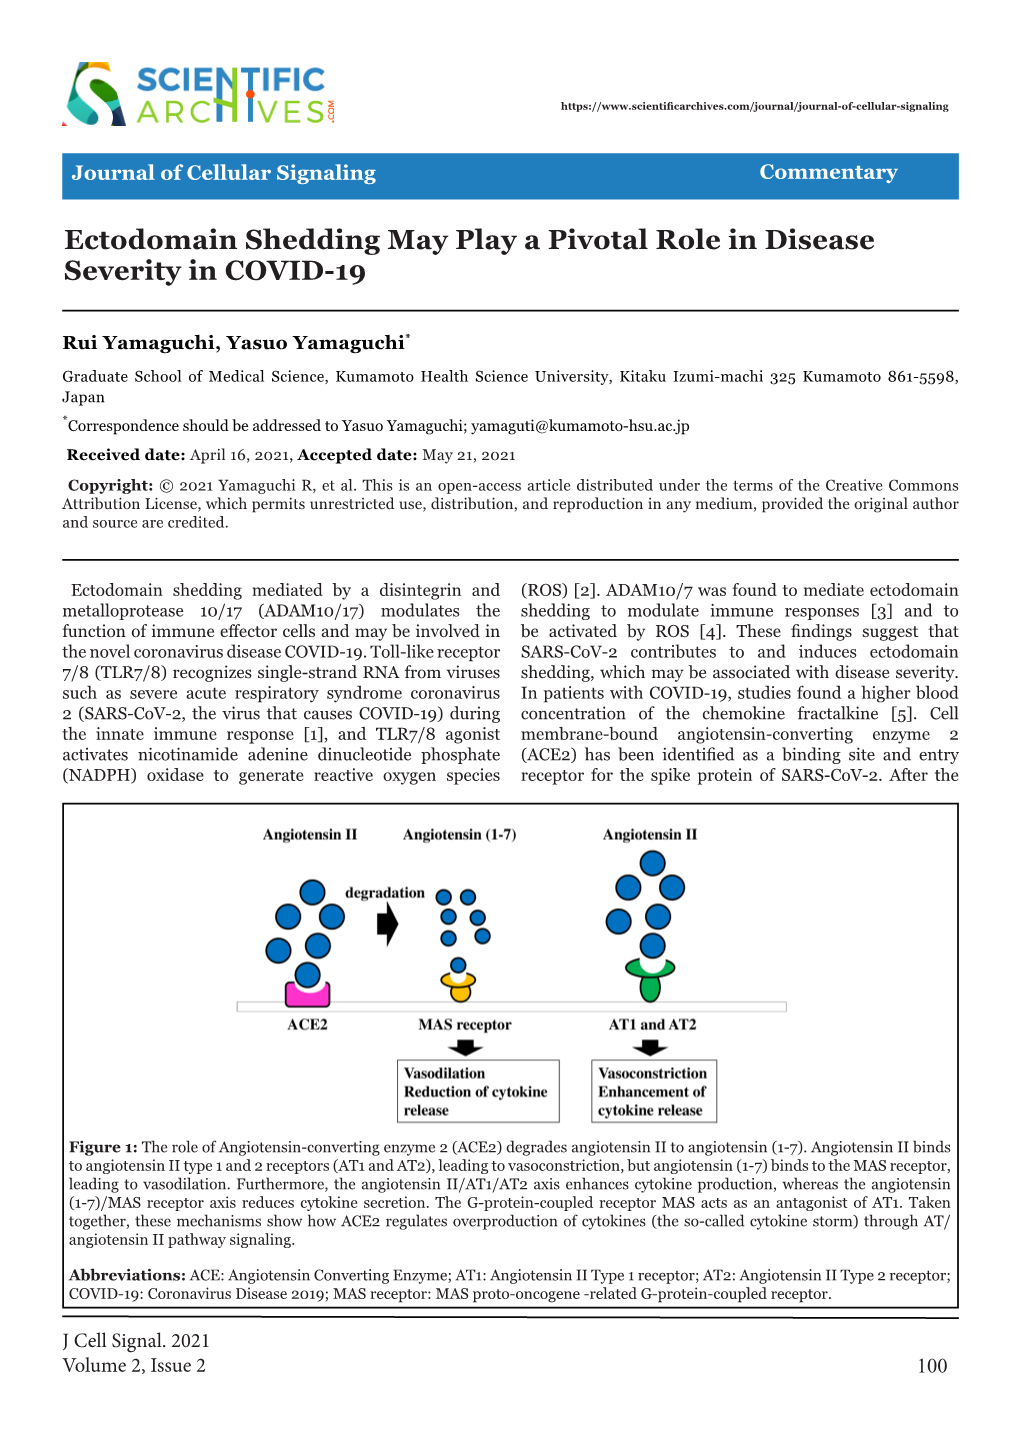 Ectodomain Shedding May Play a Pivotal Role in Disease Severity in COVID-19